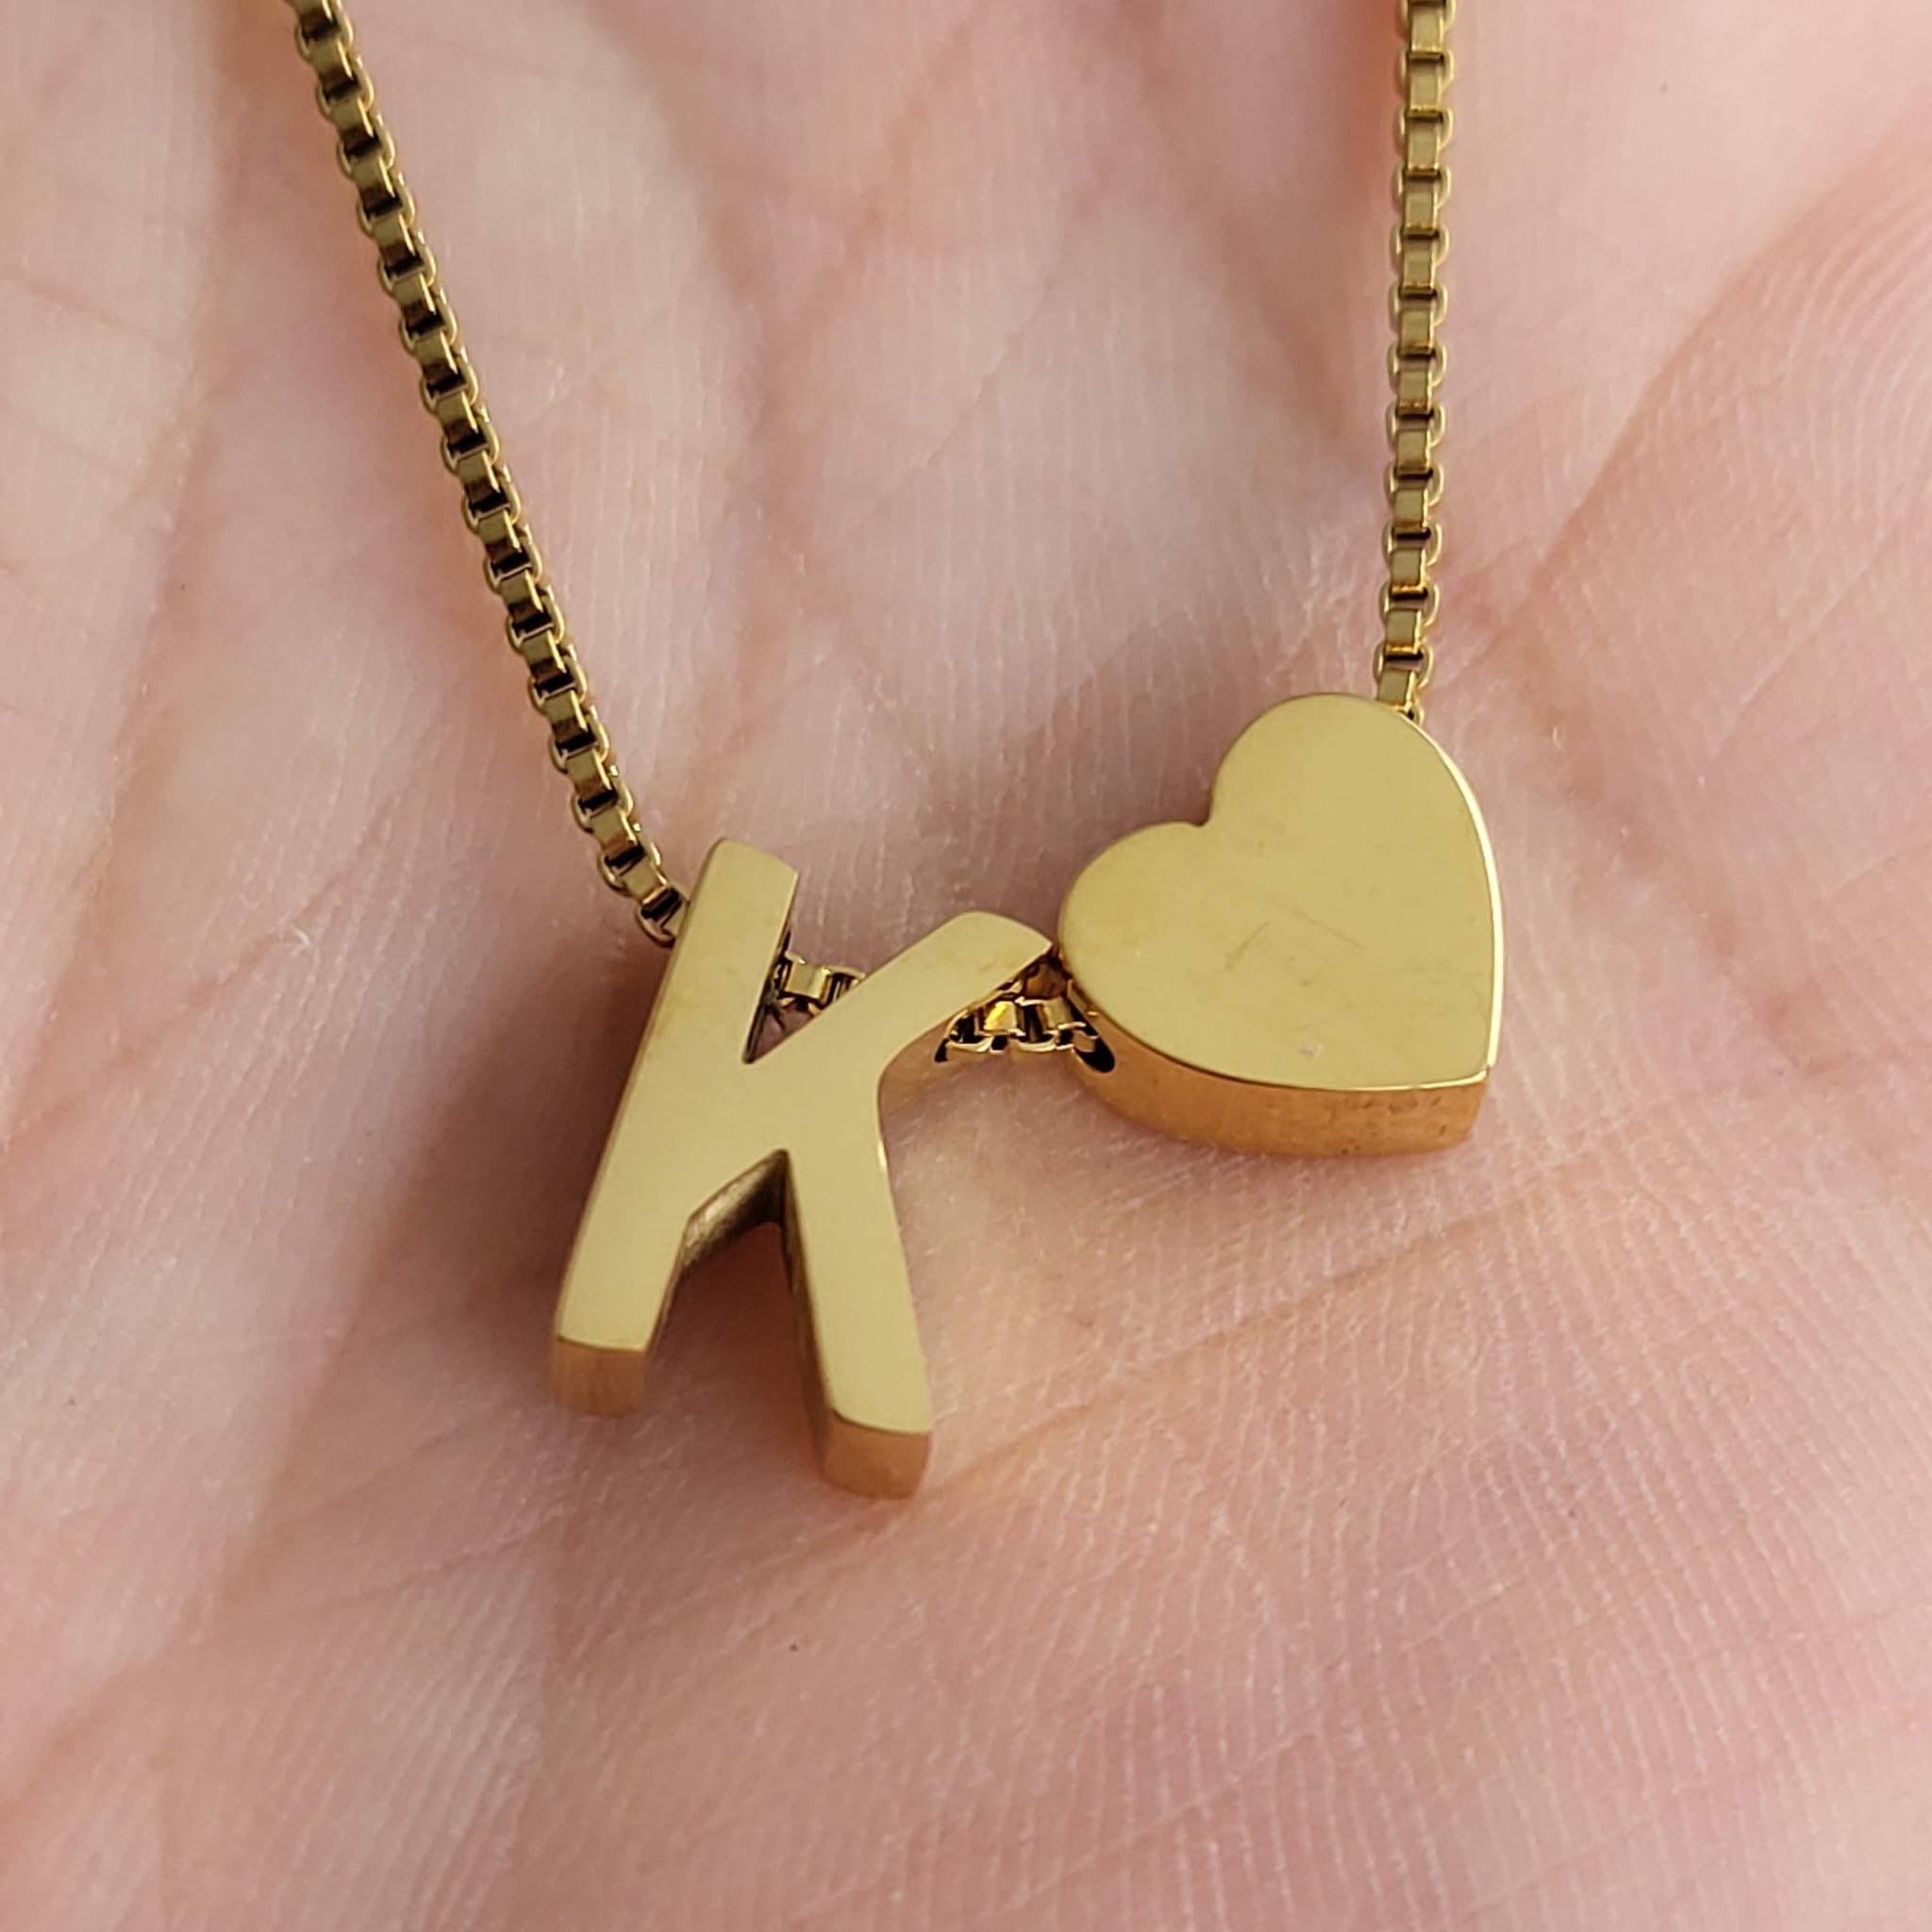 Necklace Initials Love - K